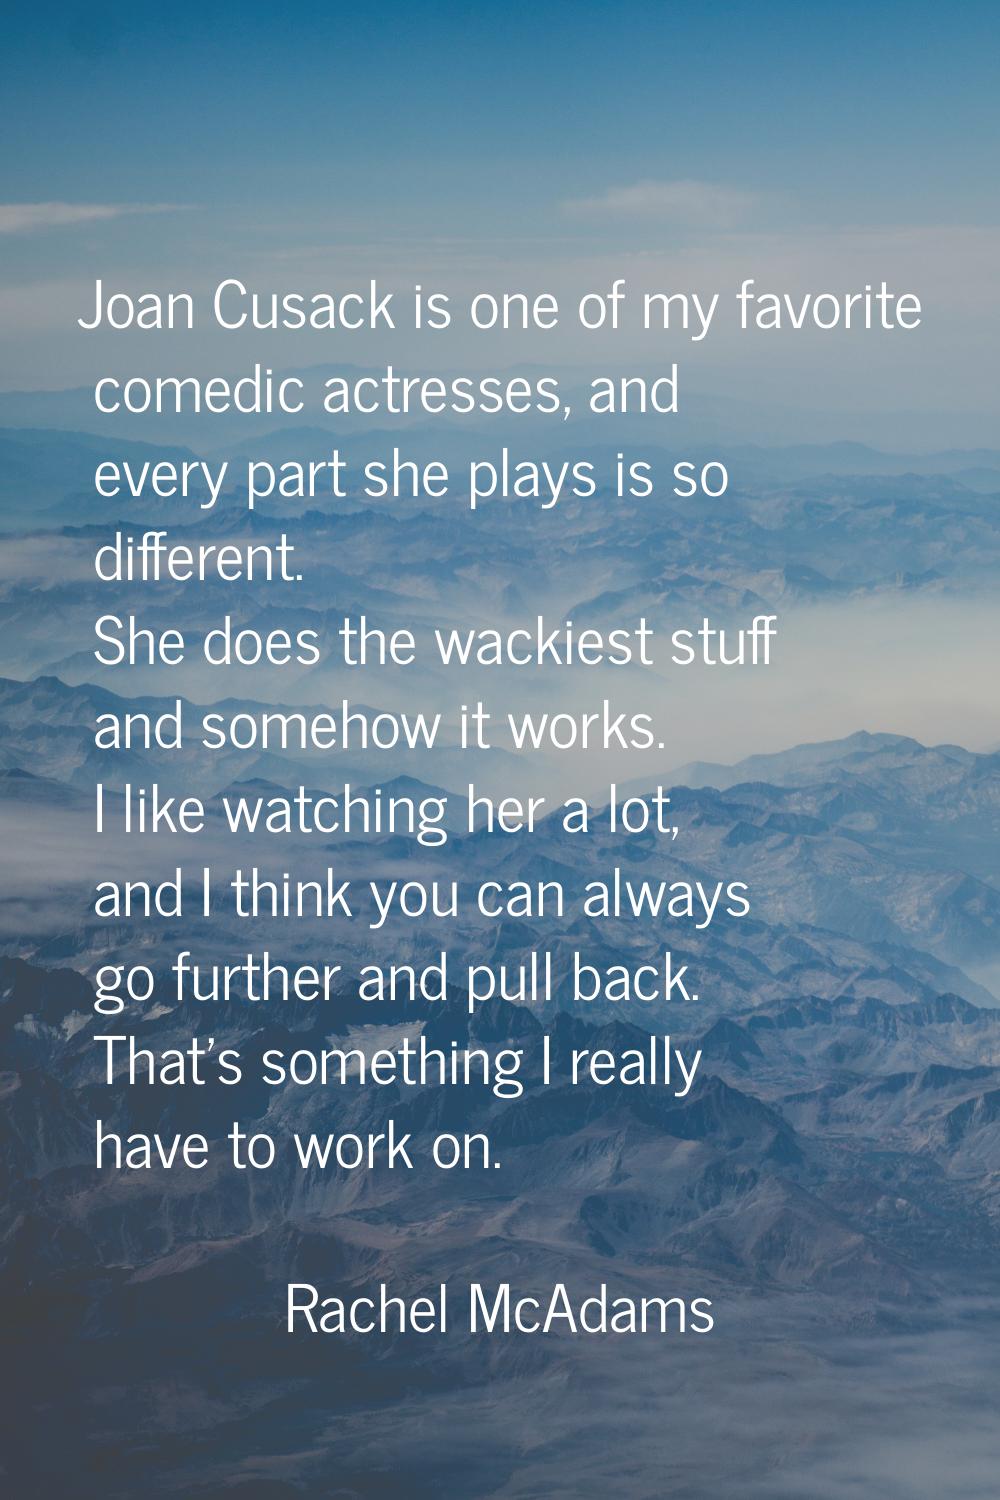 Joan Cusack is one of my favorite comedic actresses, and every part she plays is so different. She 